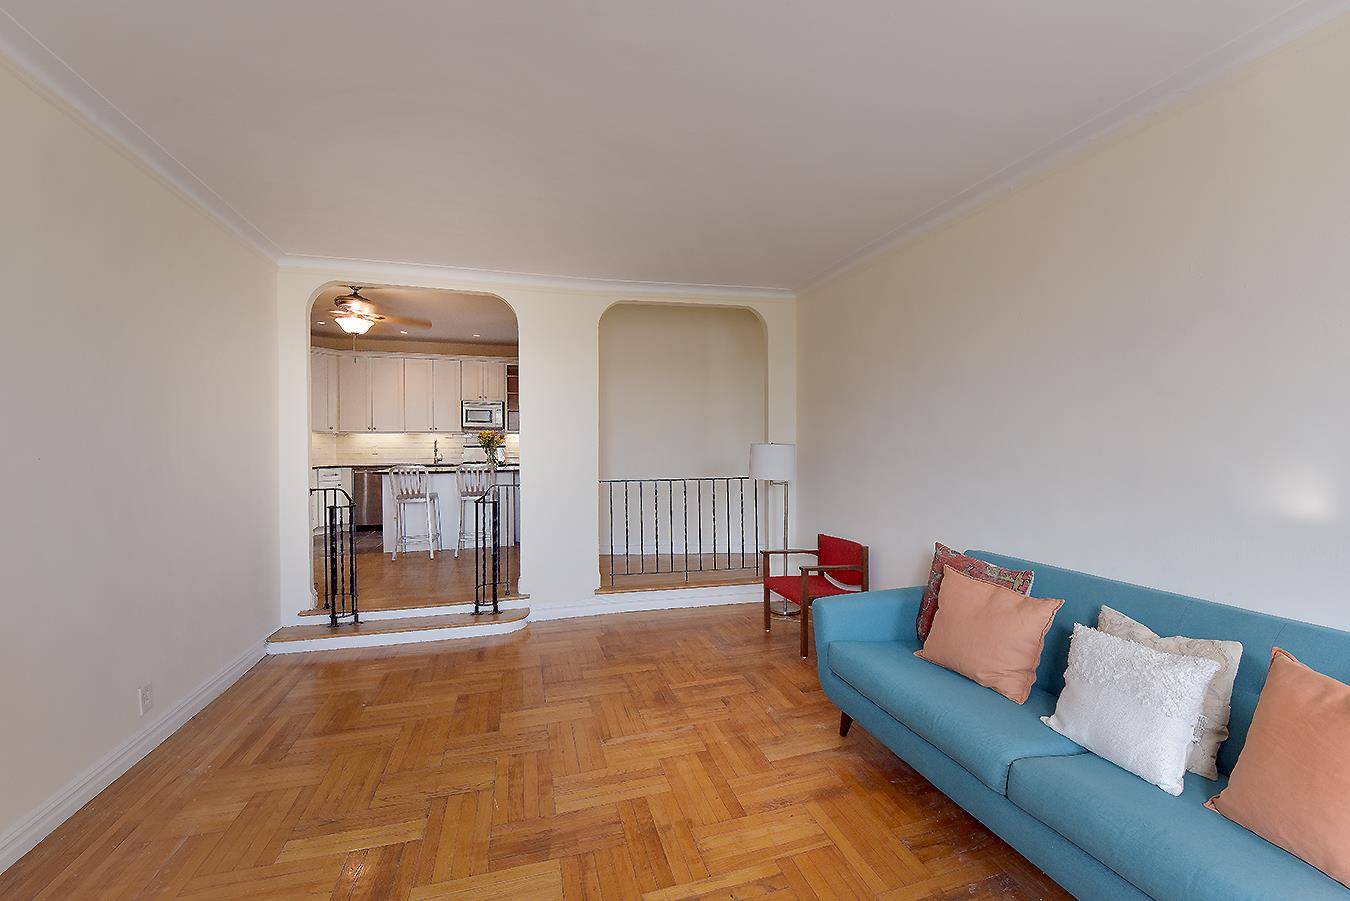 Two Bedroom Two Bath w Private Laundry Room This oversized two bed, two bath across the street from Inwood Hill Park features all the comforts of home and includes a ...